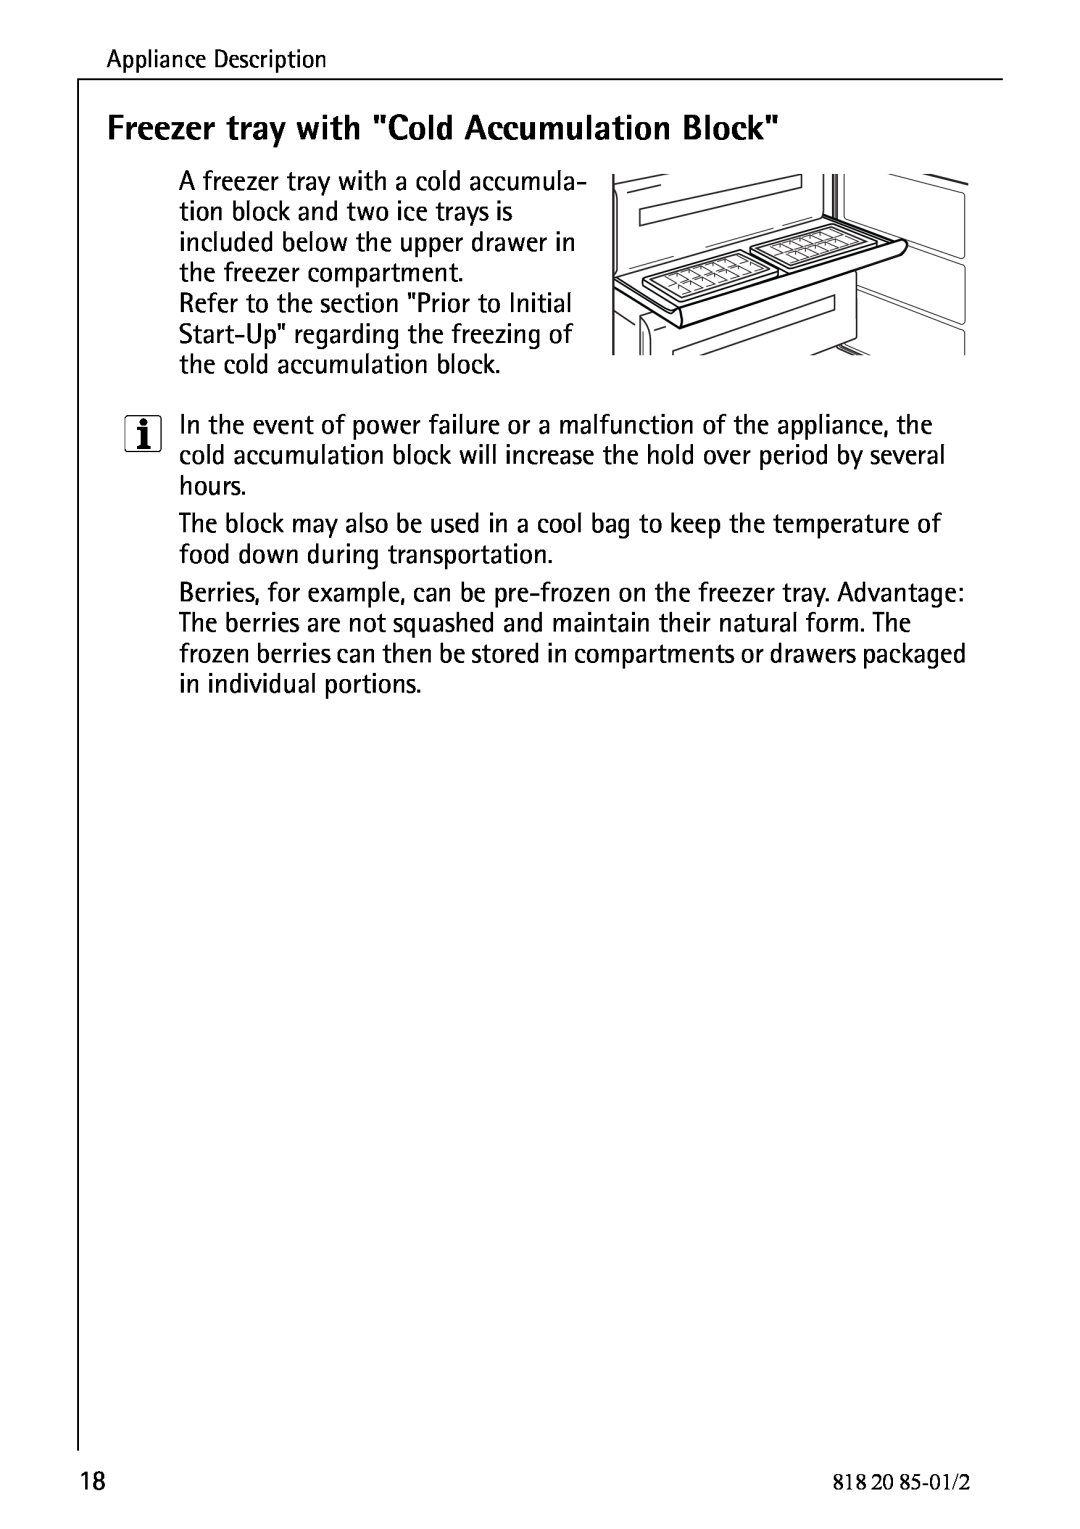 Electrolux 818 20 85 operating instructions Freezer tray with Cold Accumulation Block 